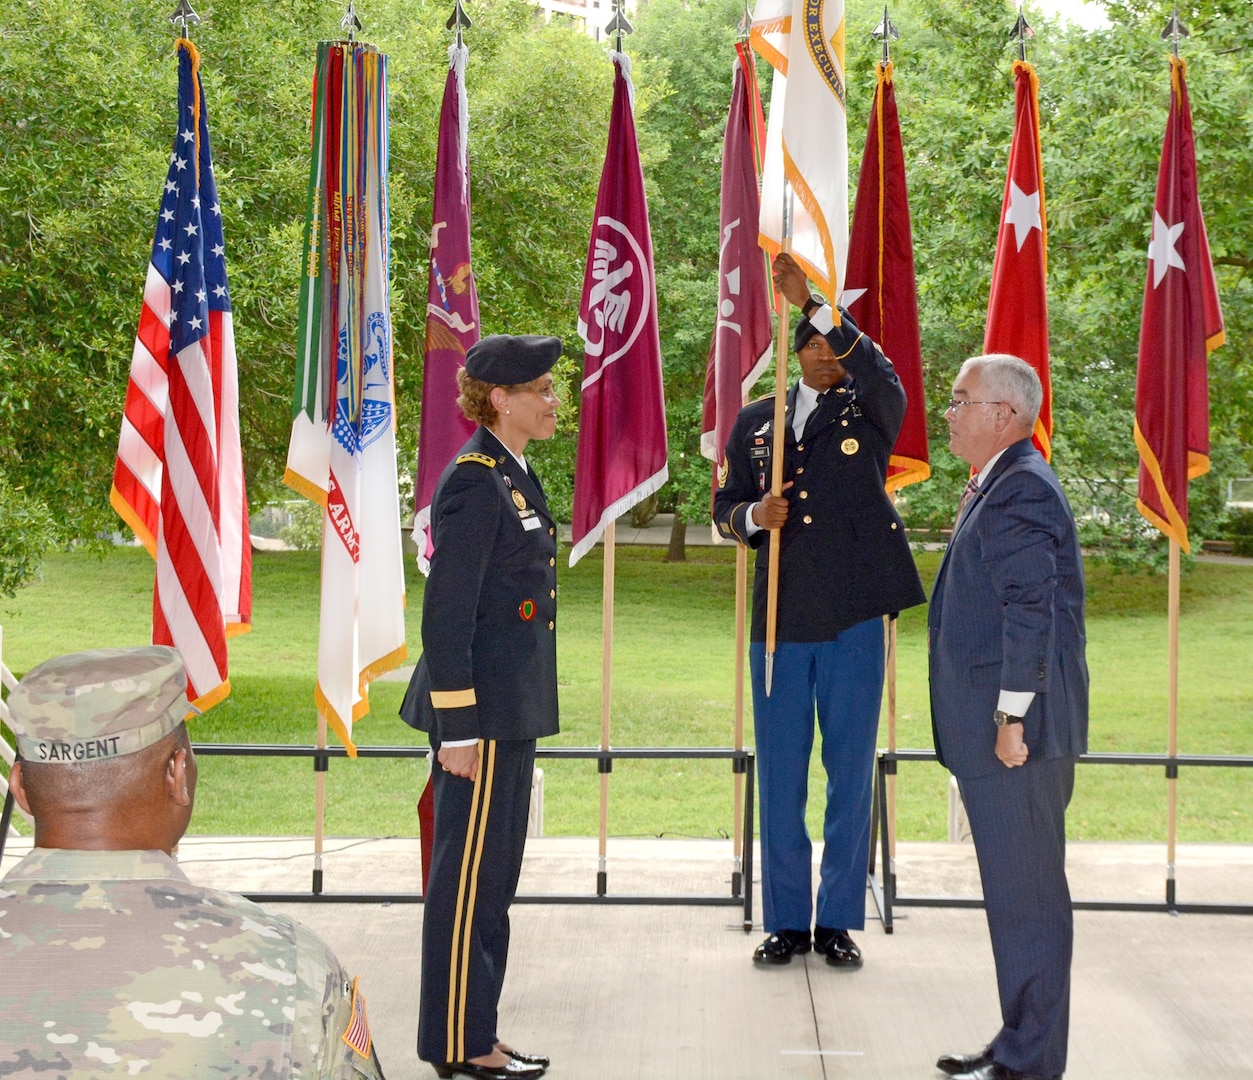 Command Sgt. Maj. Michael L. Gragg, MEDCOM Command Sergeant Major, unfurls the Senior Executive Service flag, as Lt. Gen. Nadja Y. West and Joseph M. Harmon III look on. Harmon was appointed to the Senior Executive Service in a ceremony at the Army Medical Department Museum April 29.